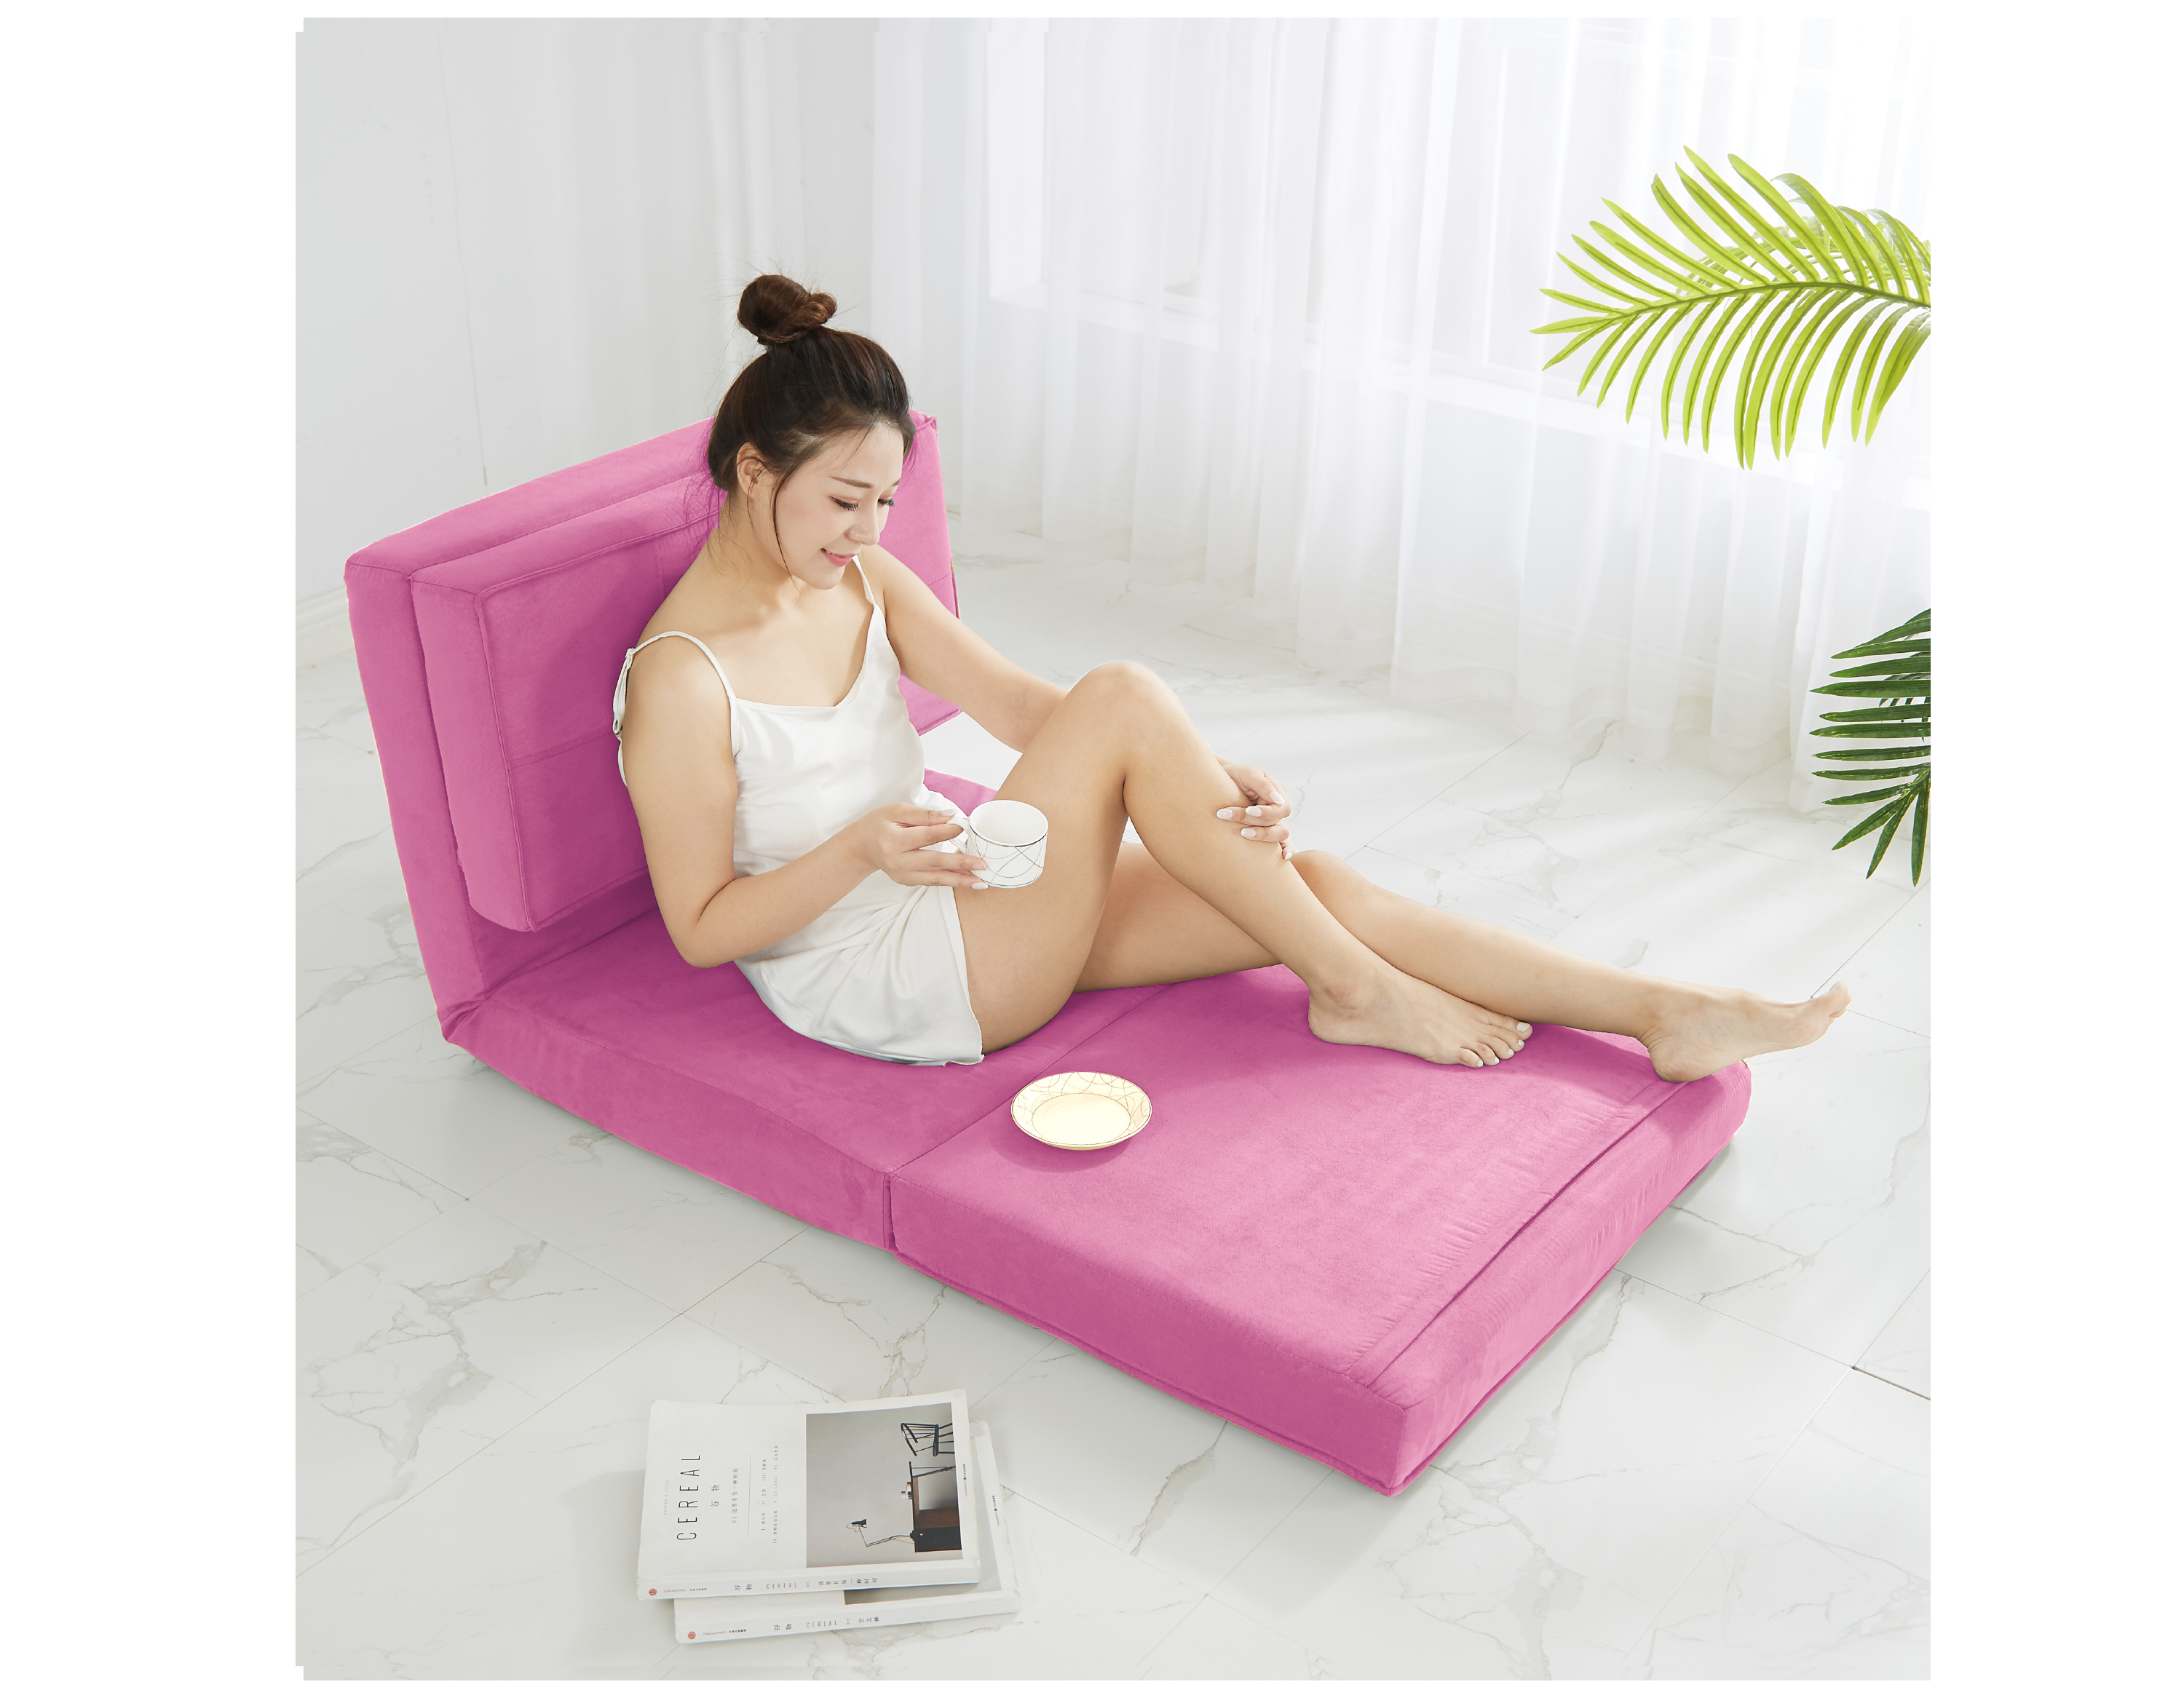 Your Zone Ultra Soft Suede 3 Position Convertible Flip Lounge Chair, Racy Pink - image 2 of 7